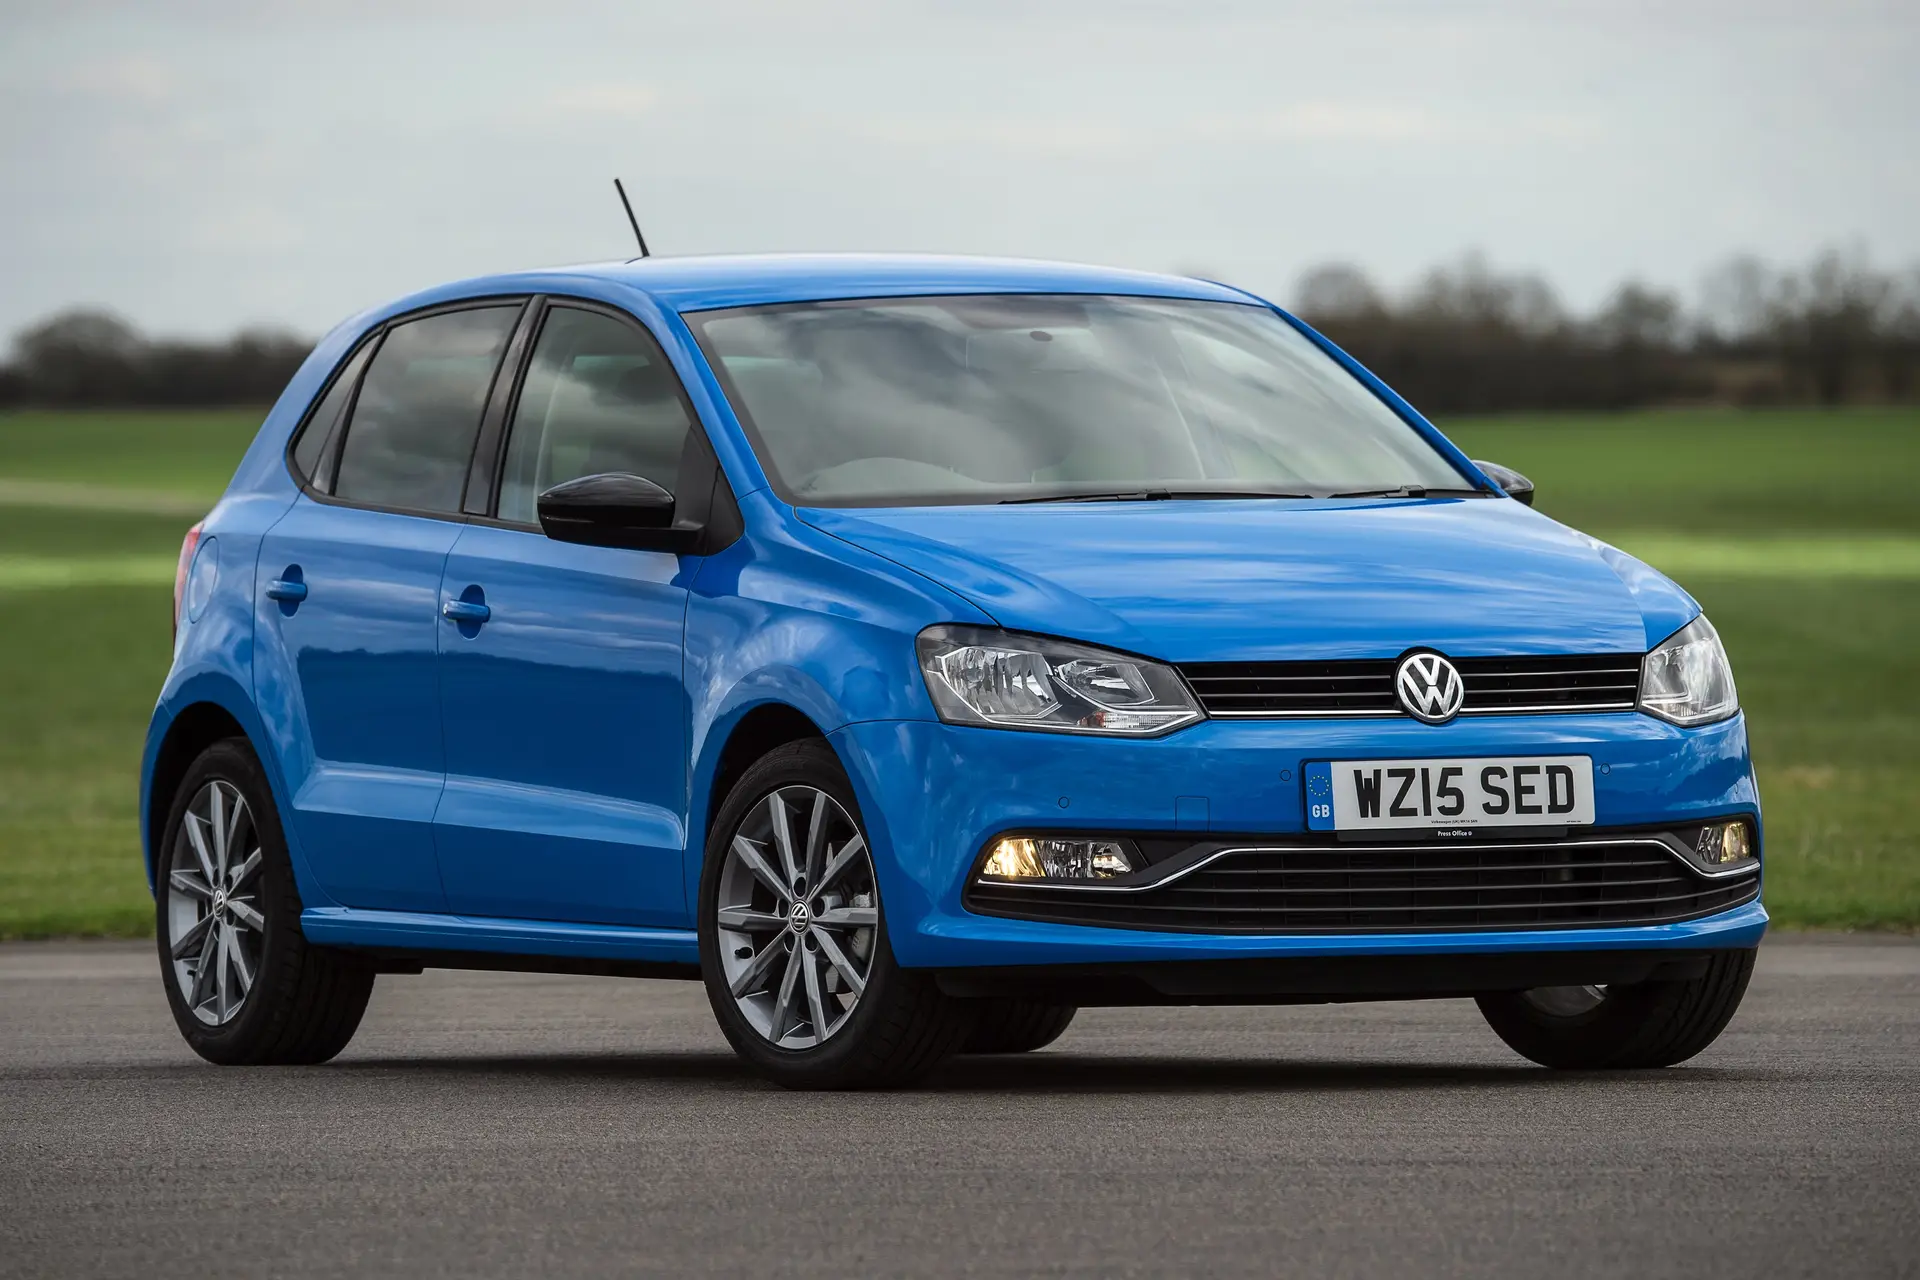  Volkswagen Polo (2009-2017) Review: exterior front three quarter photo of the Volkswagen Polo 